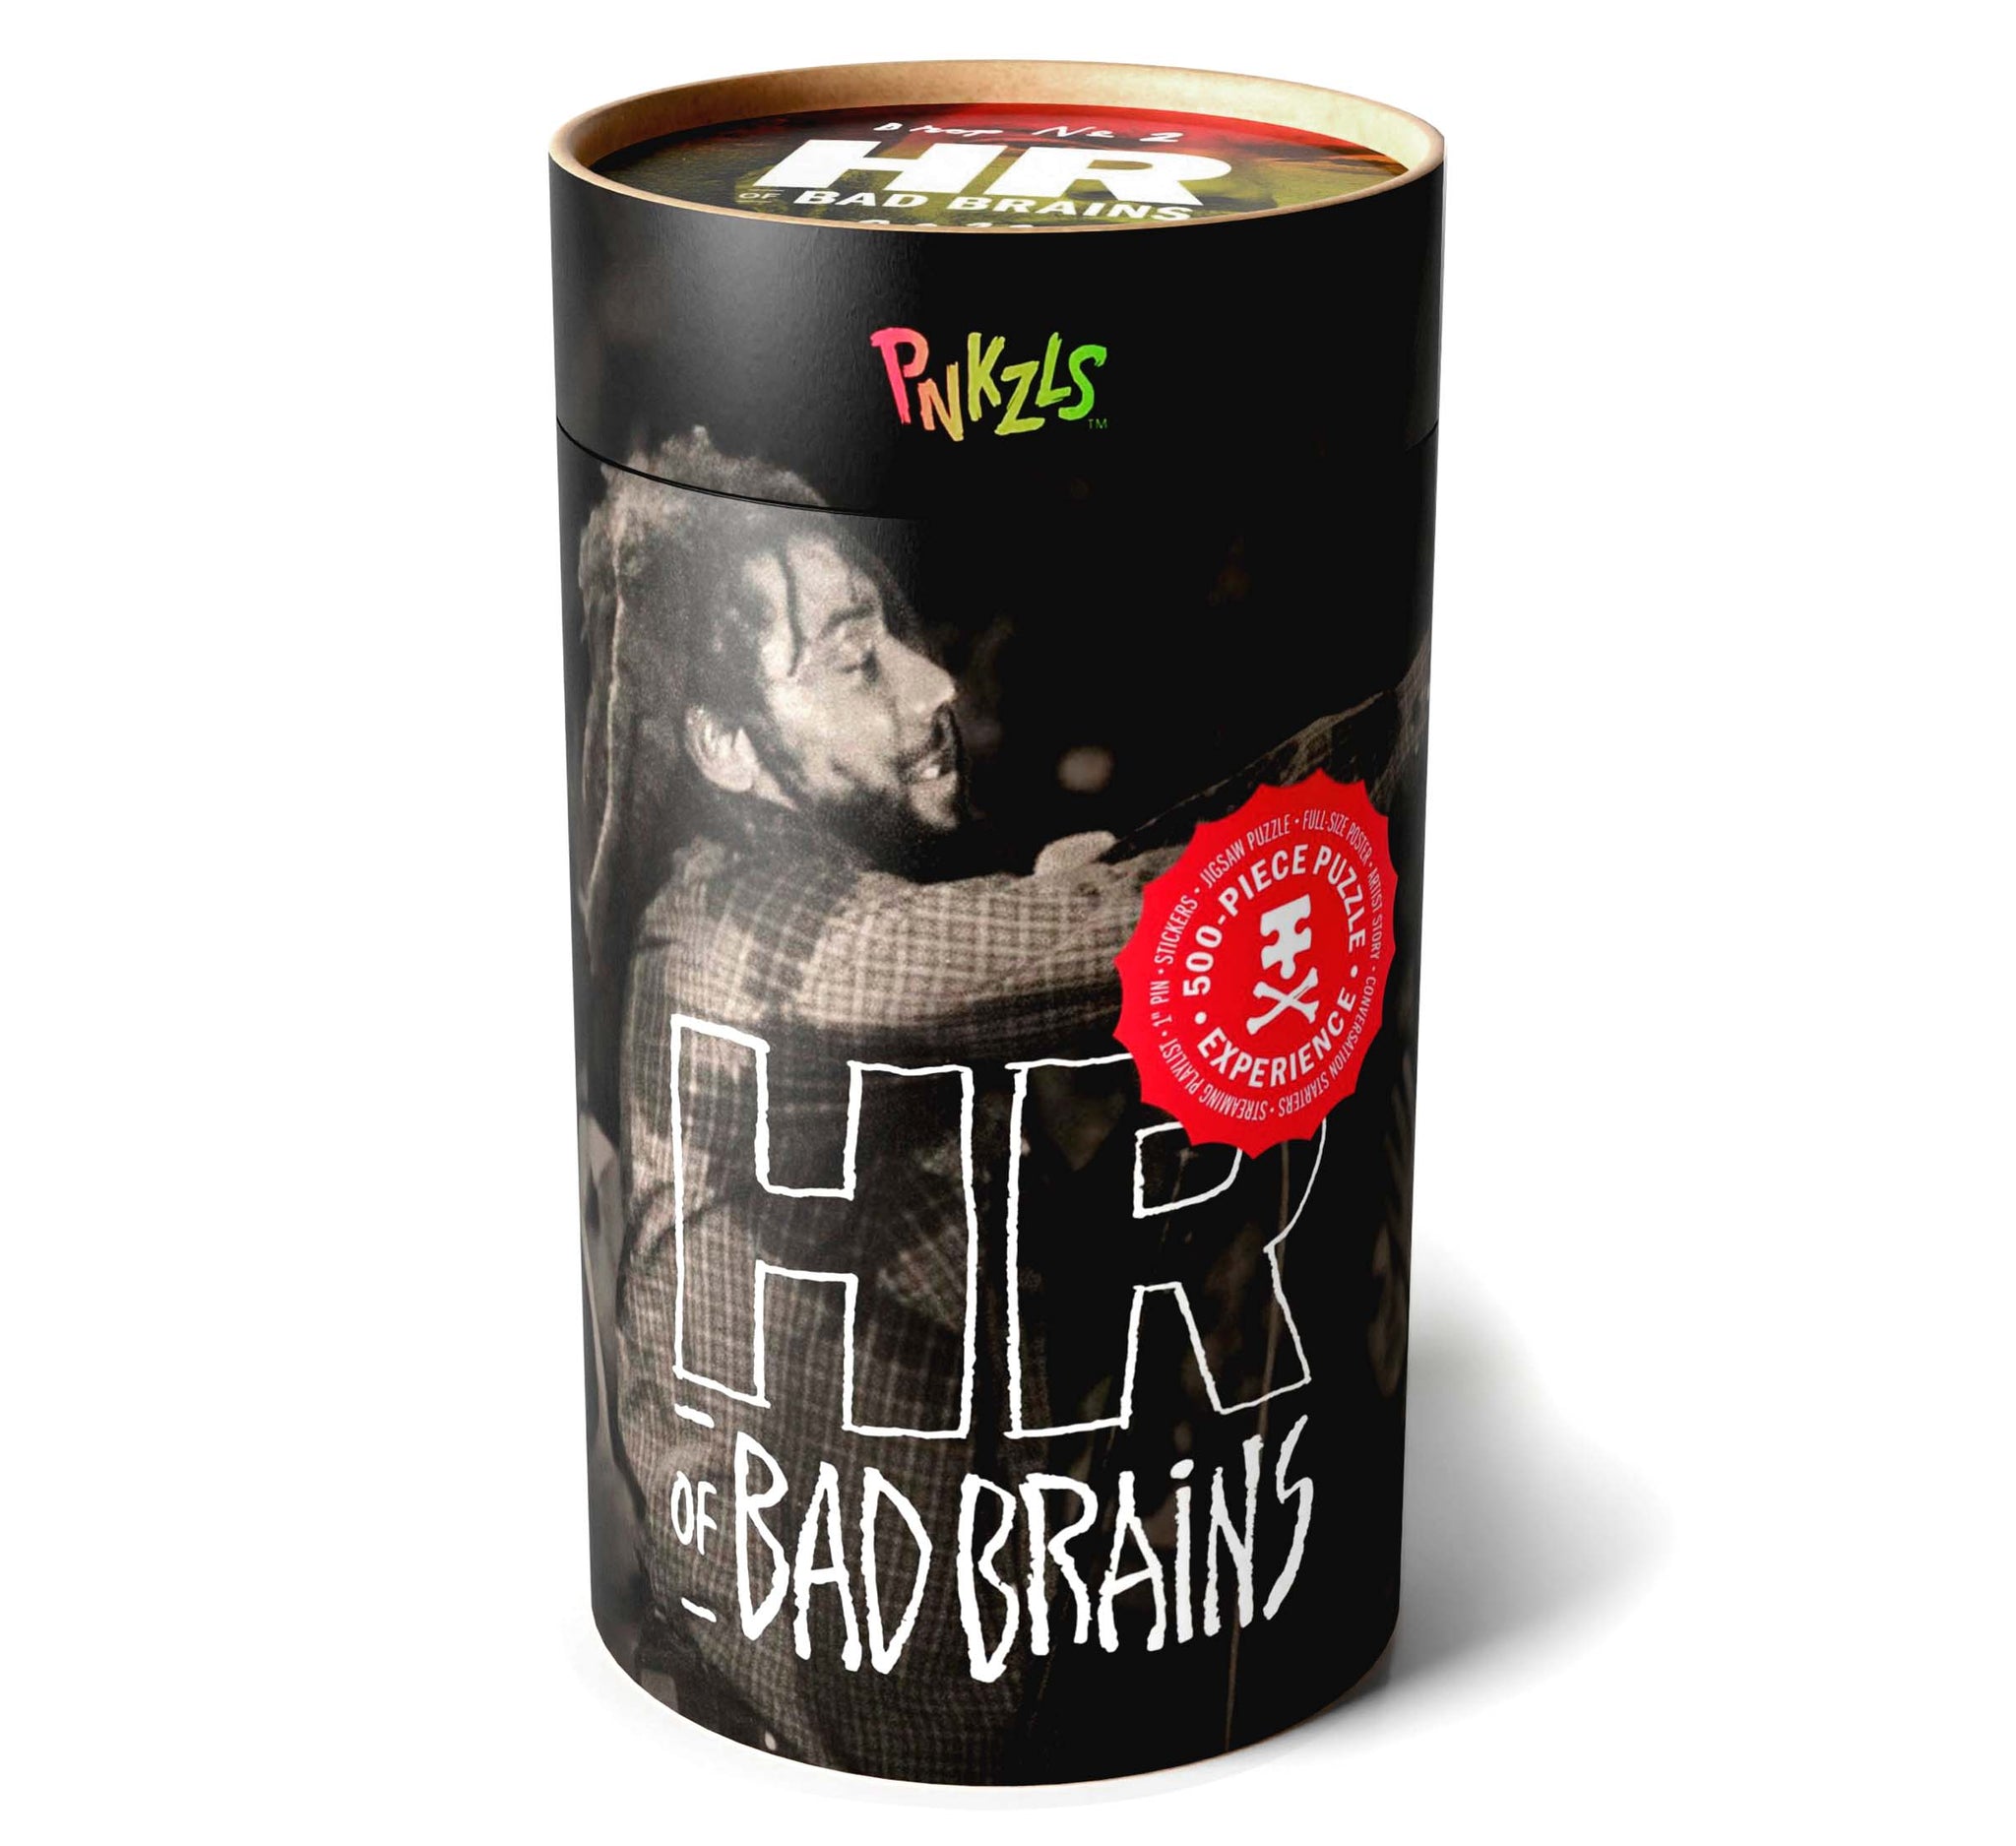 H.R. of Bad Brains 500-Piece Jigsaw Puzzle Experience - Punkzles